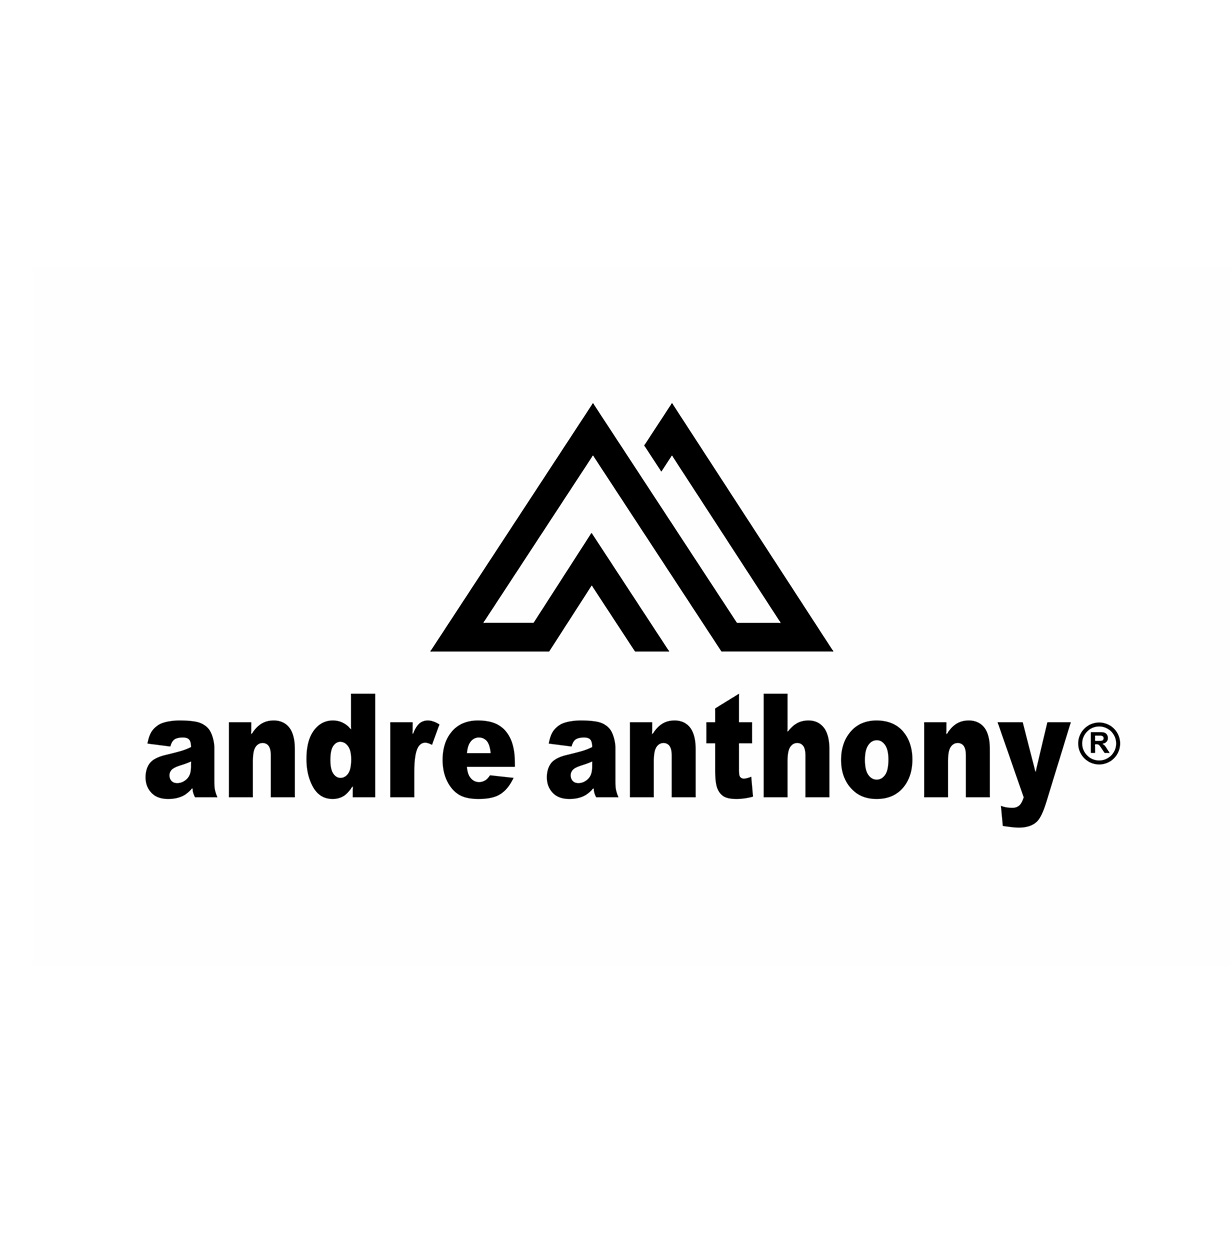 andre anthony